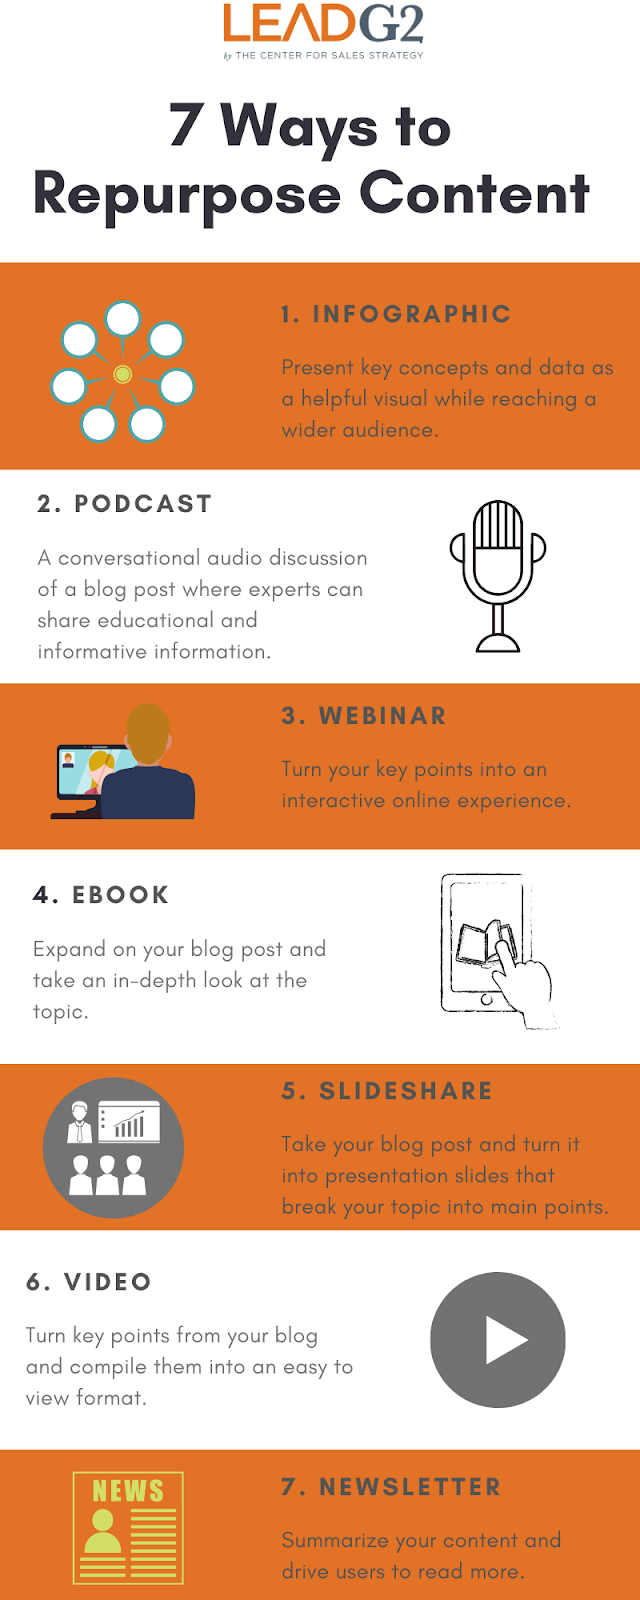 Repurpose content into an infographic, podcast, webinar, ebook, slideshare, video, and newsletter.